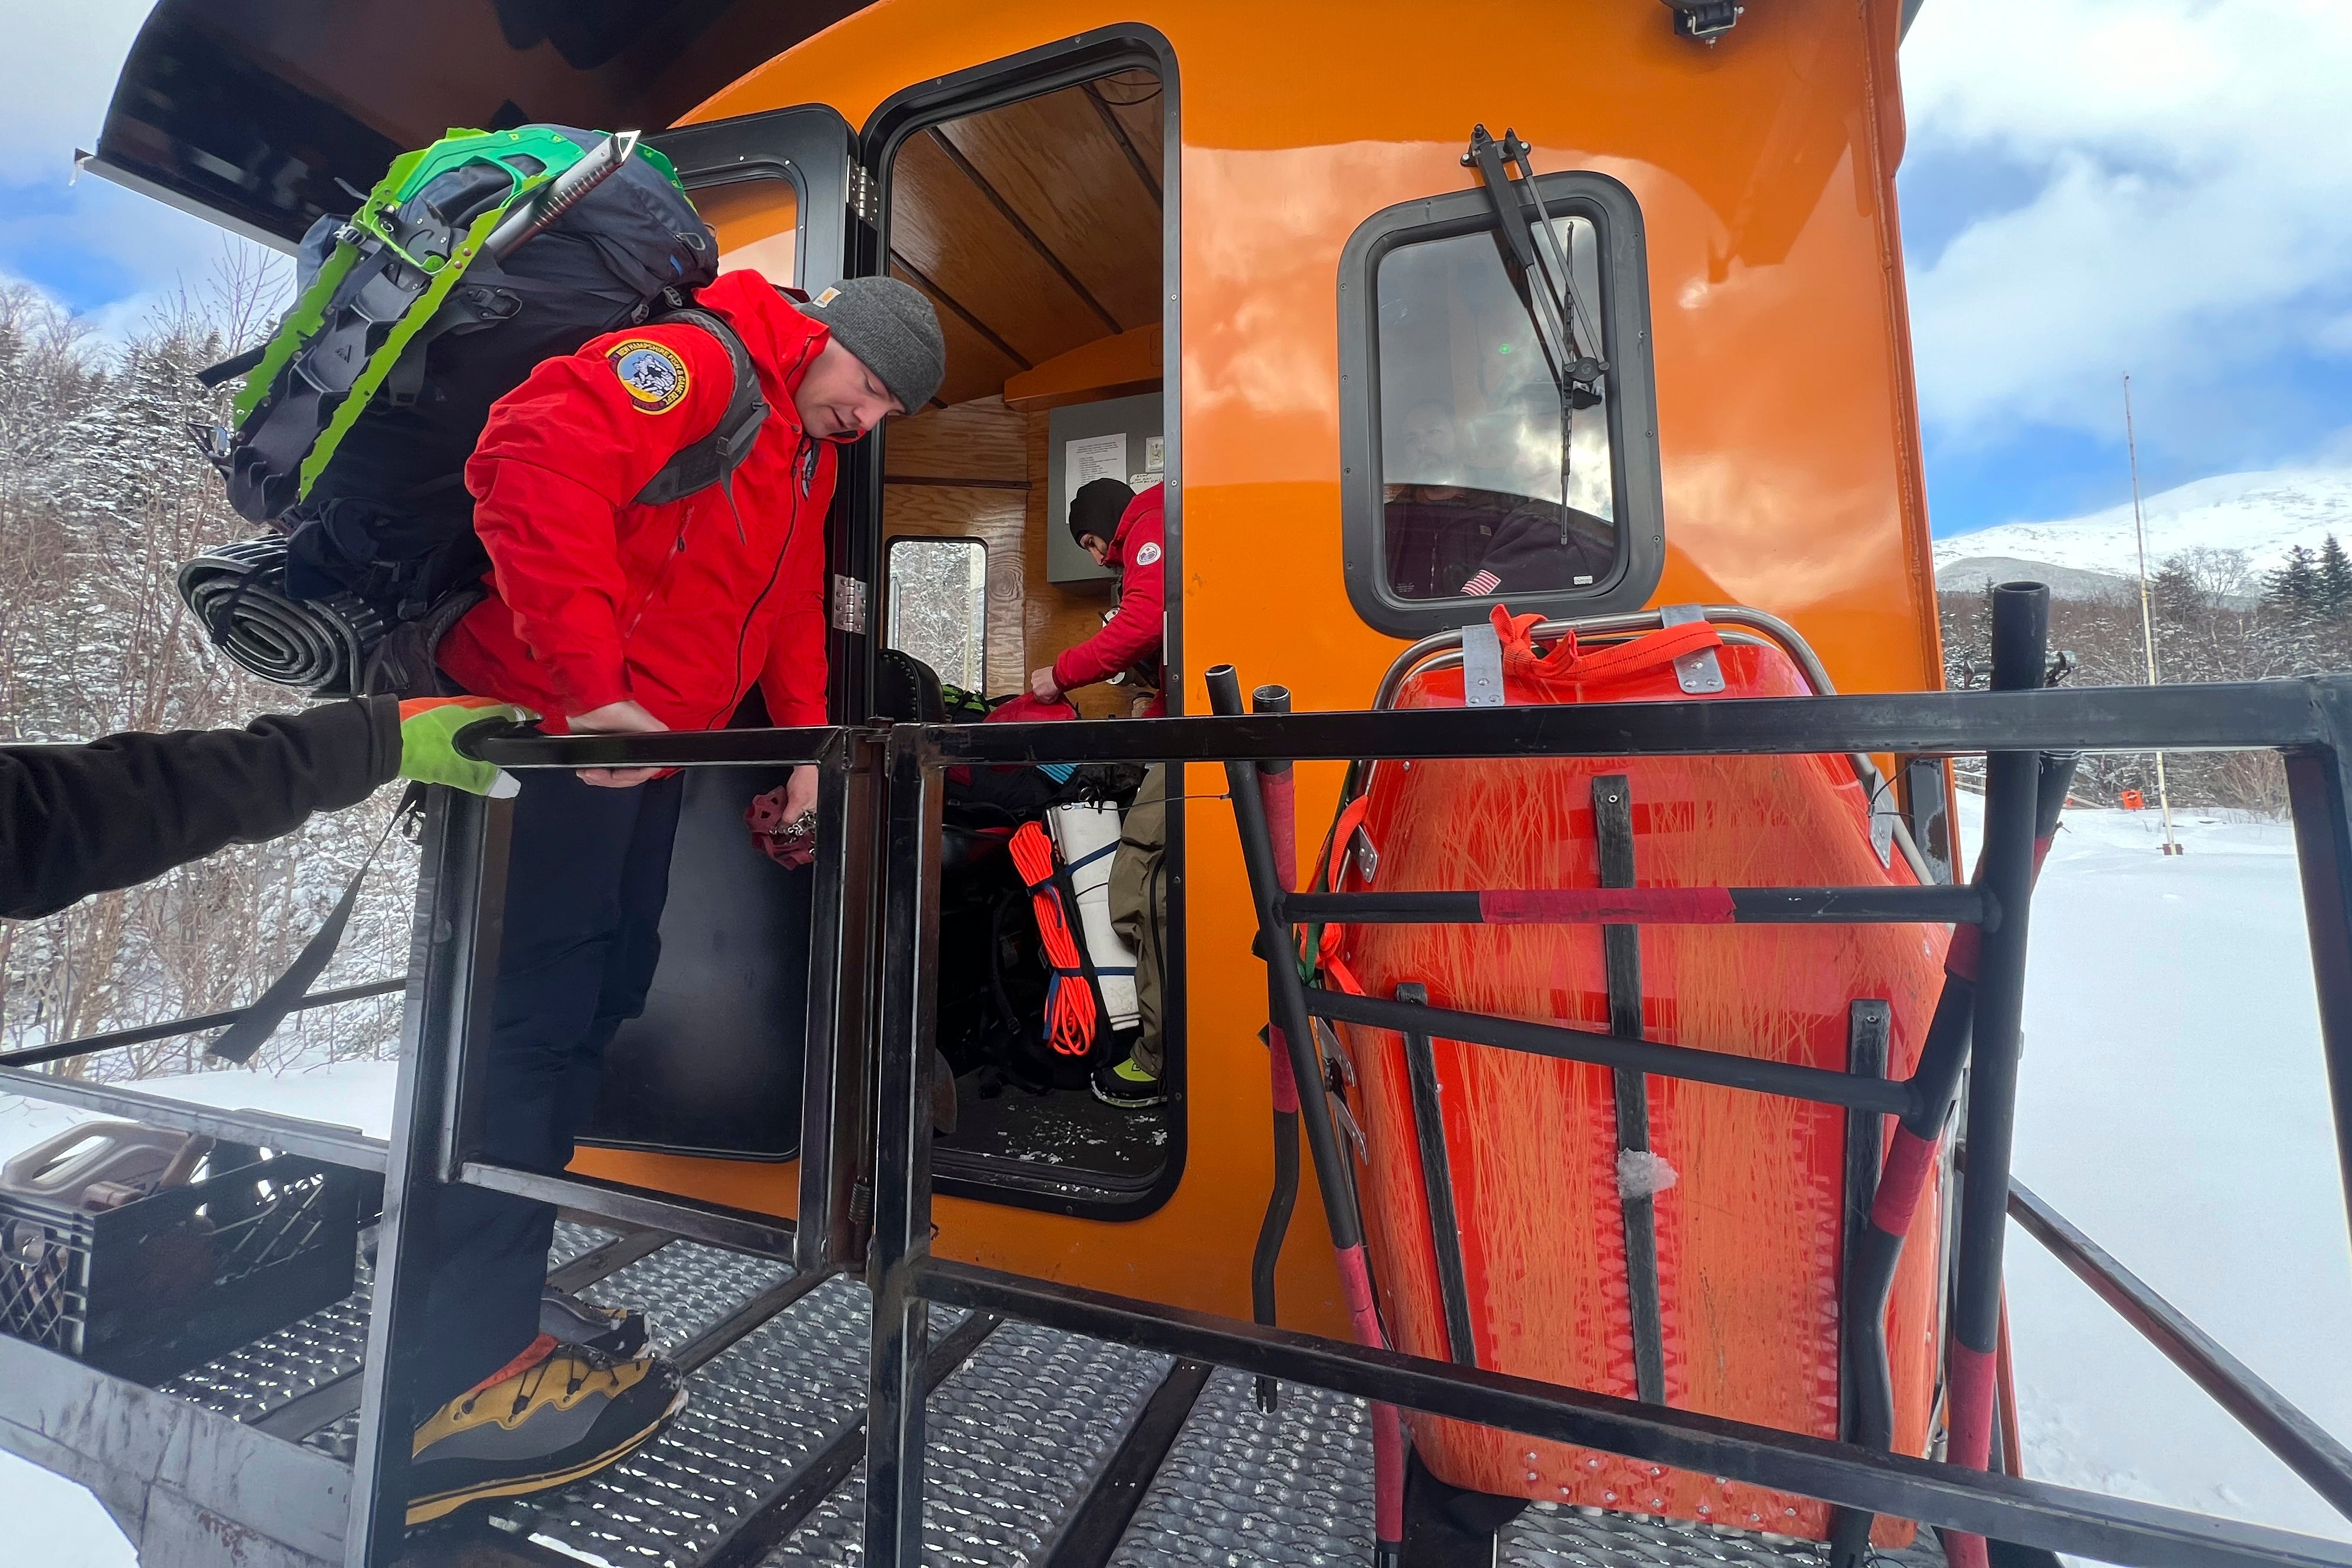 Rescuers boarded the steep Cog Railway to make their way up to Mr Matthes